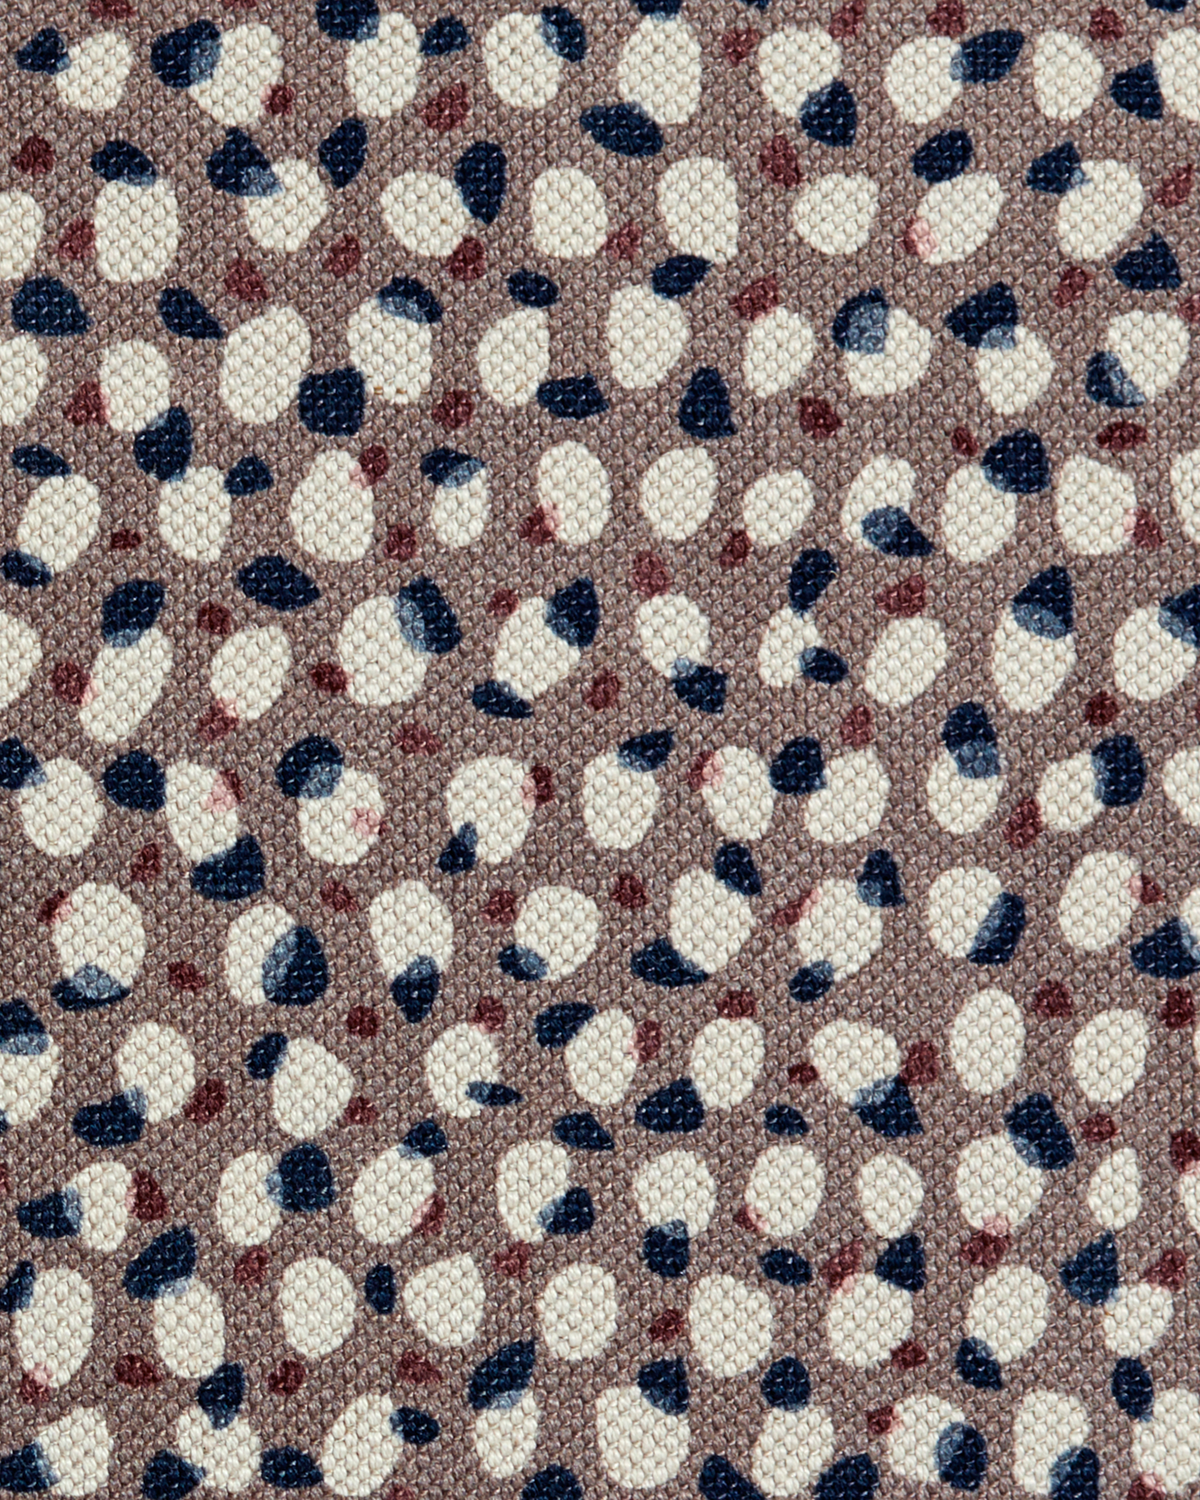 Scattered Dot Fabric in Earth